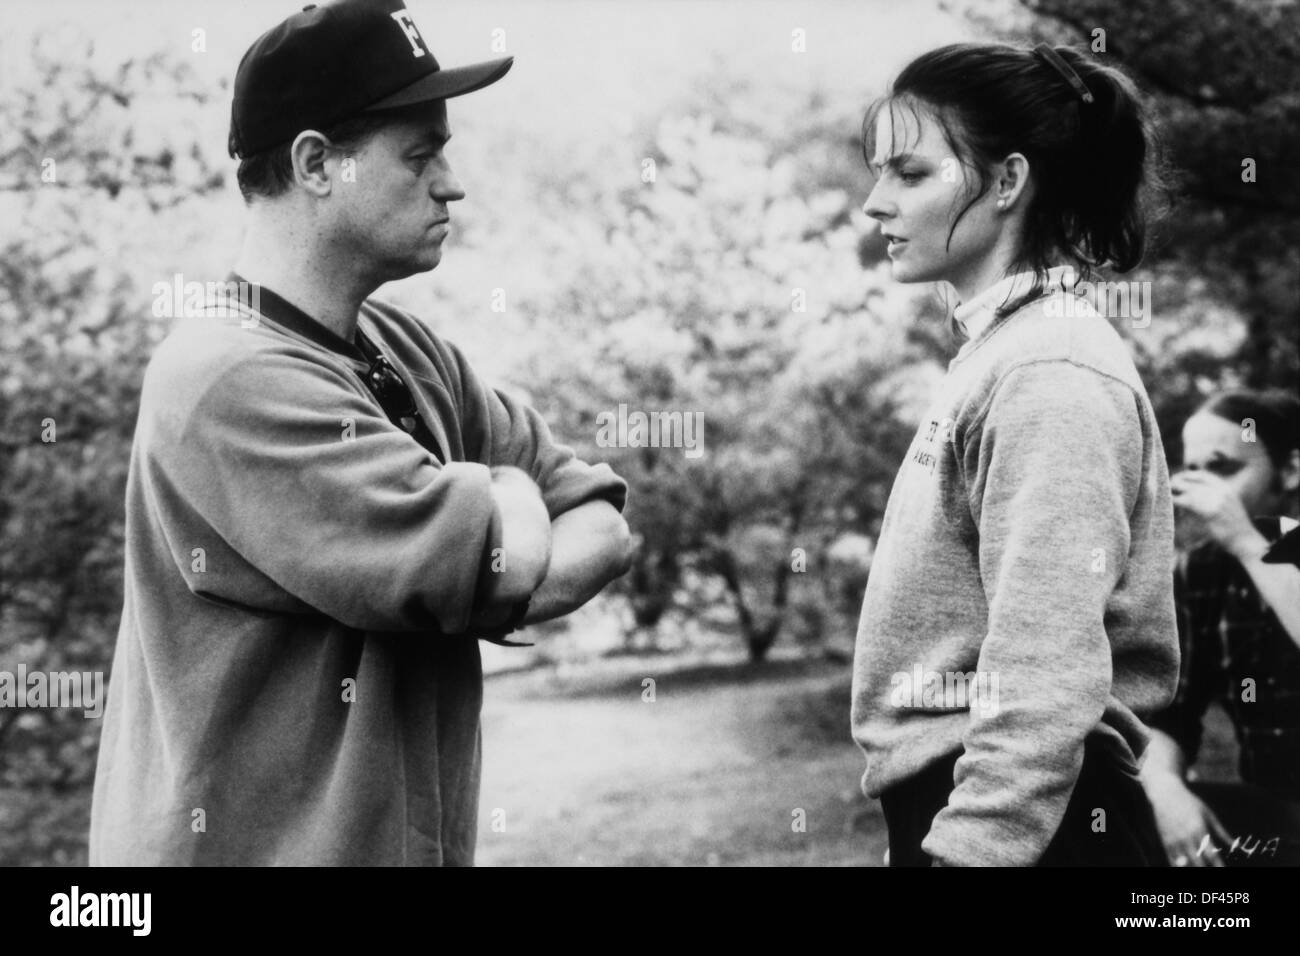 Director Jonathan Demme Directing Jodie Foster on-set of the Film, 'The Silence of the Lambs', Strong Heart/Demme Production, Orion Pictures, 1991 Stock Photo